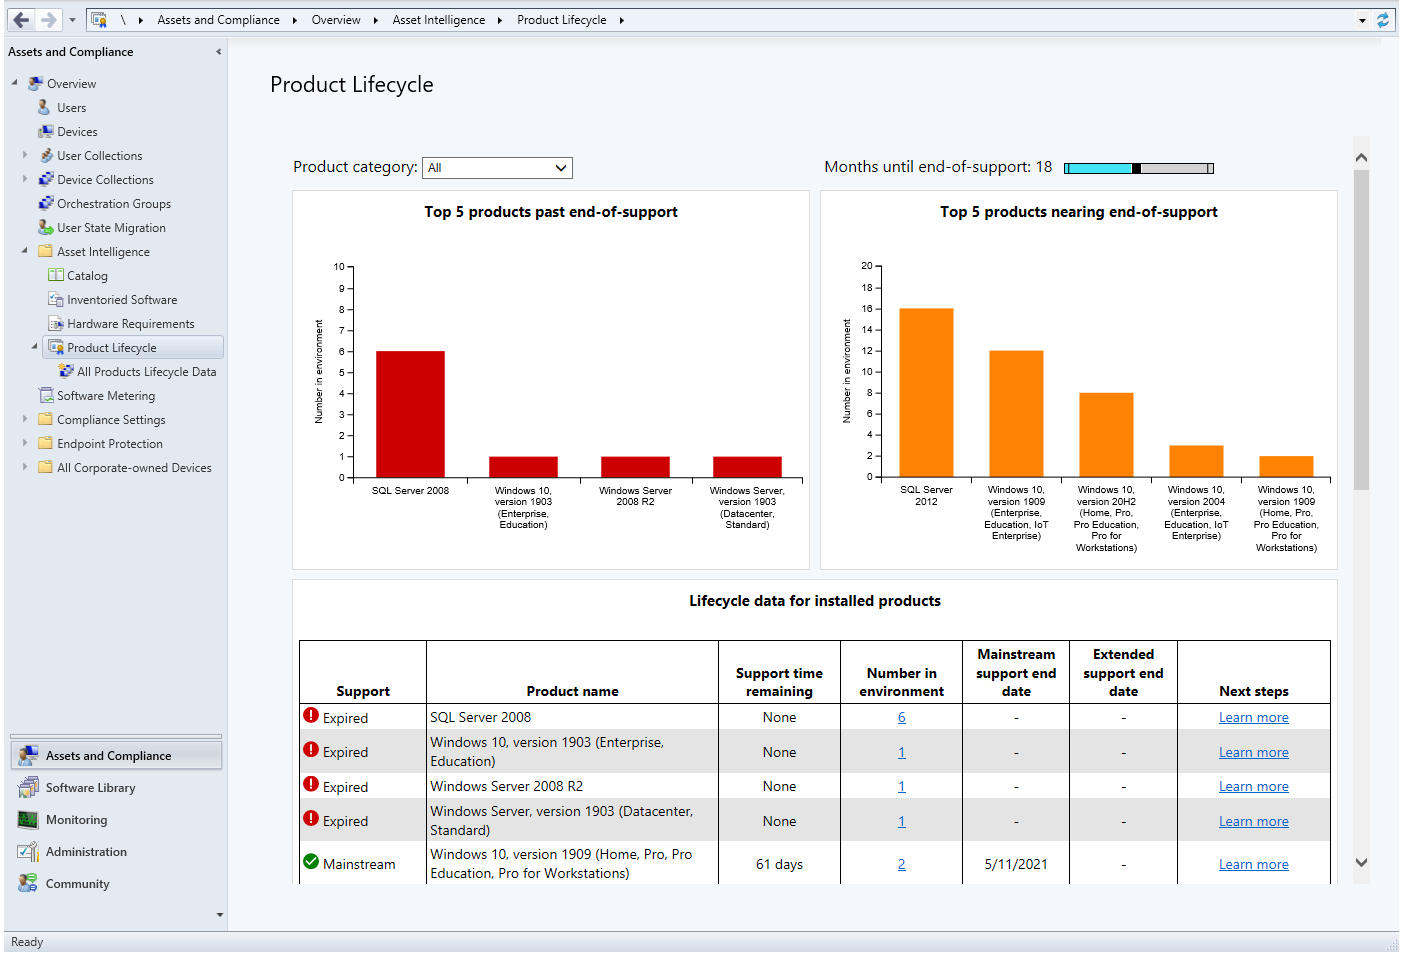 Screenshot of the product lifecycle dashboard in the console.